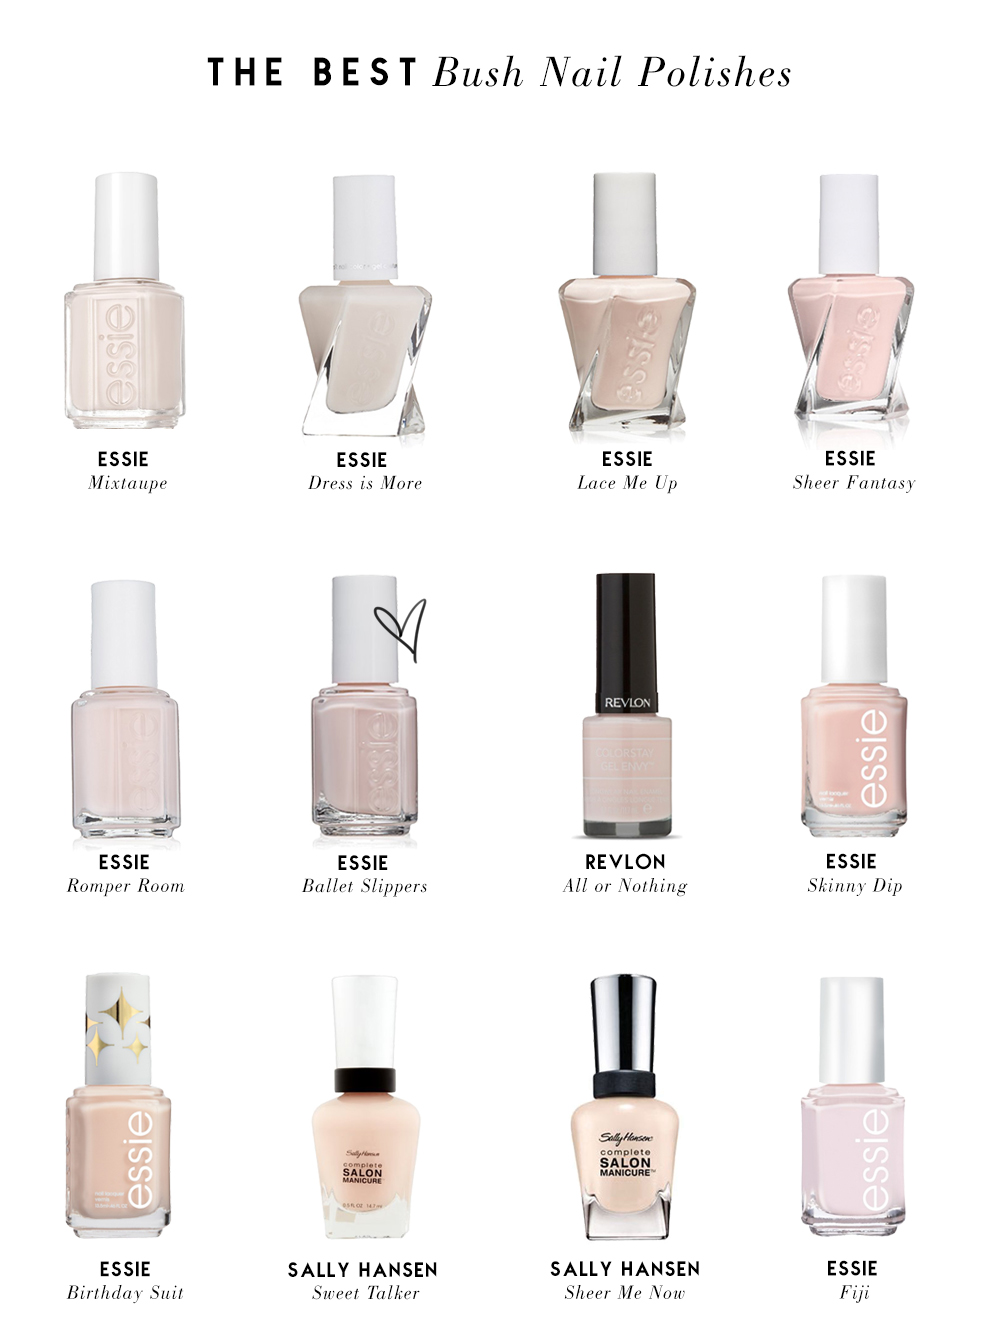 Shopping File: My Top 12 Favorite Blush Nail Polishes | THE VAULT FILES